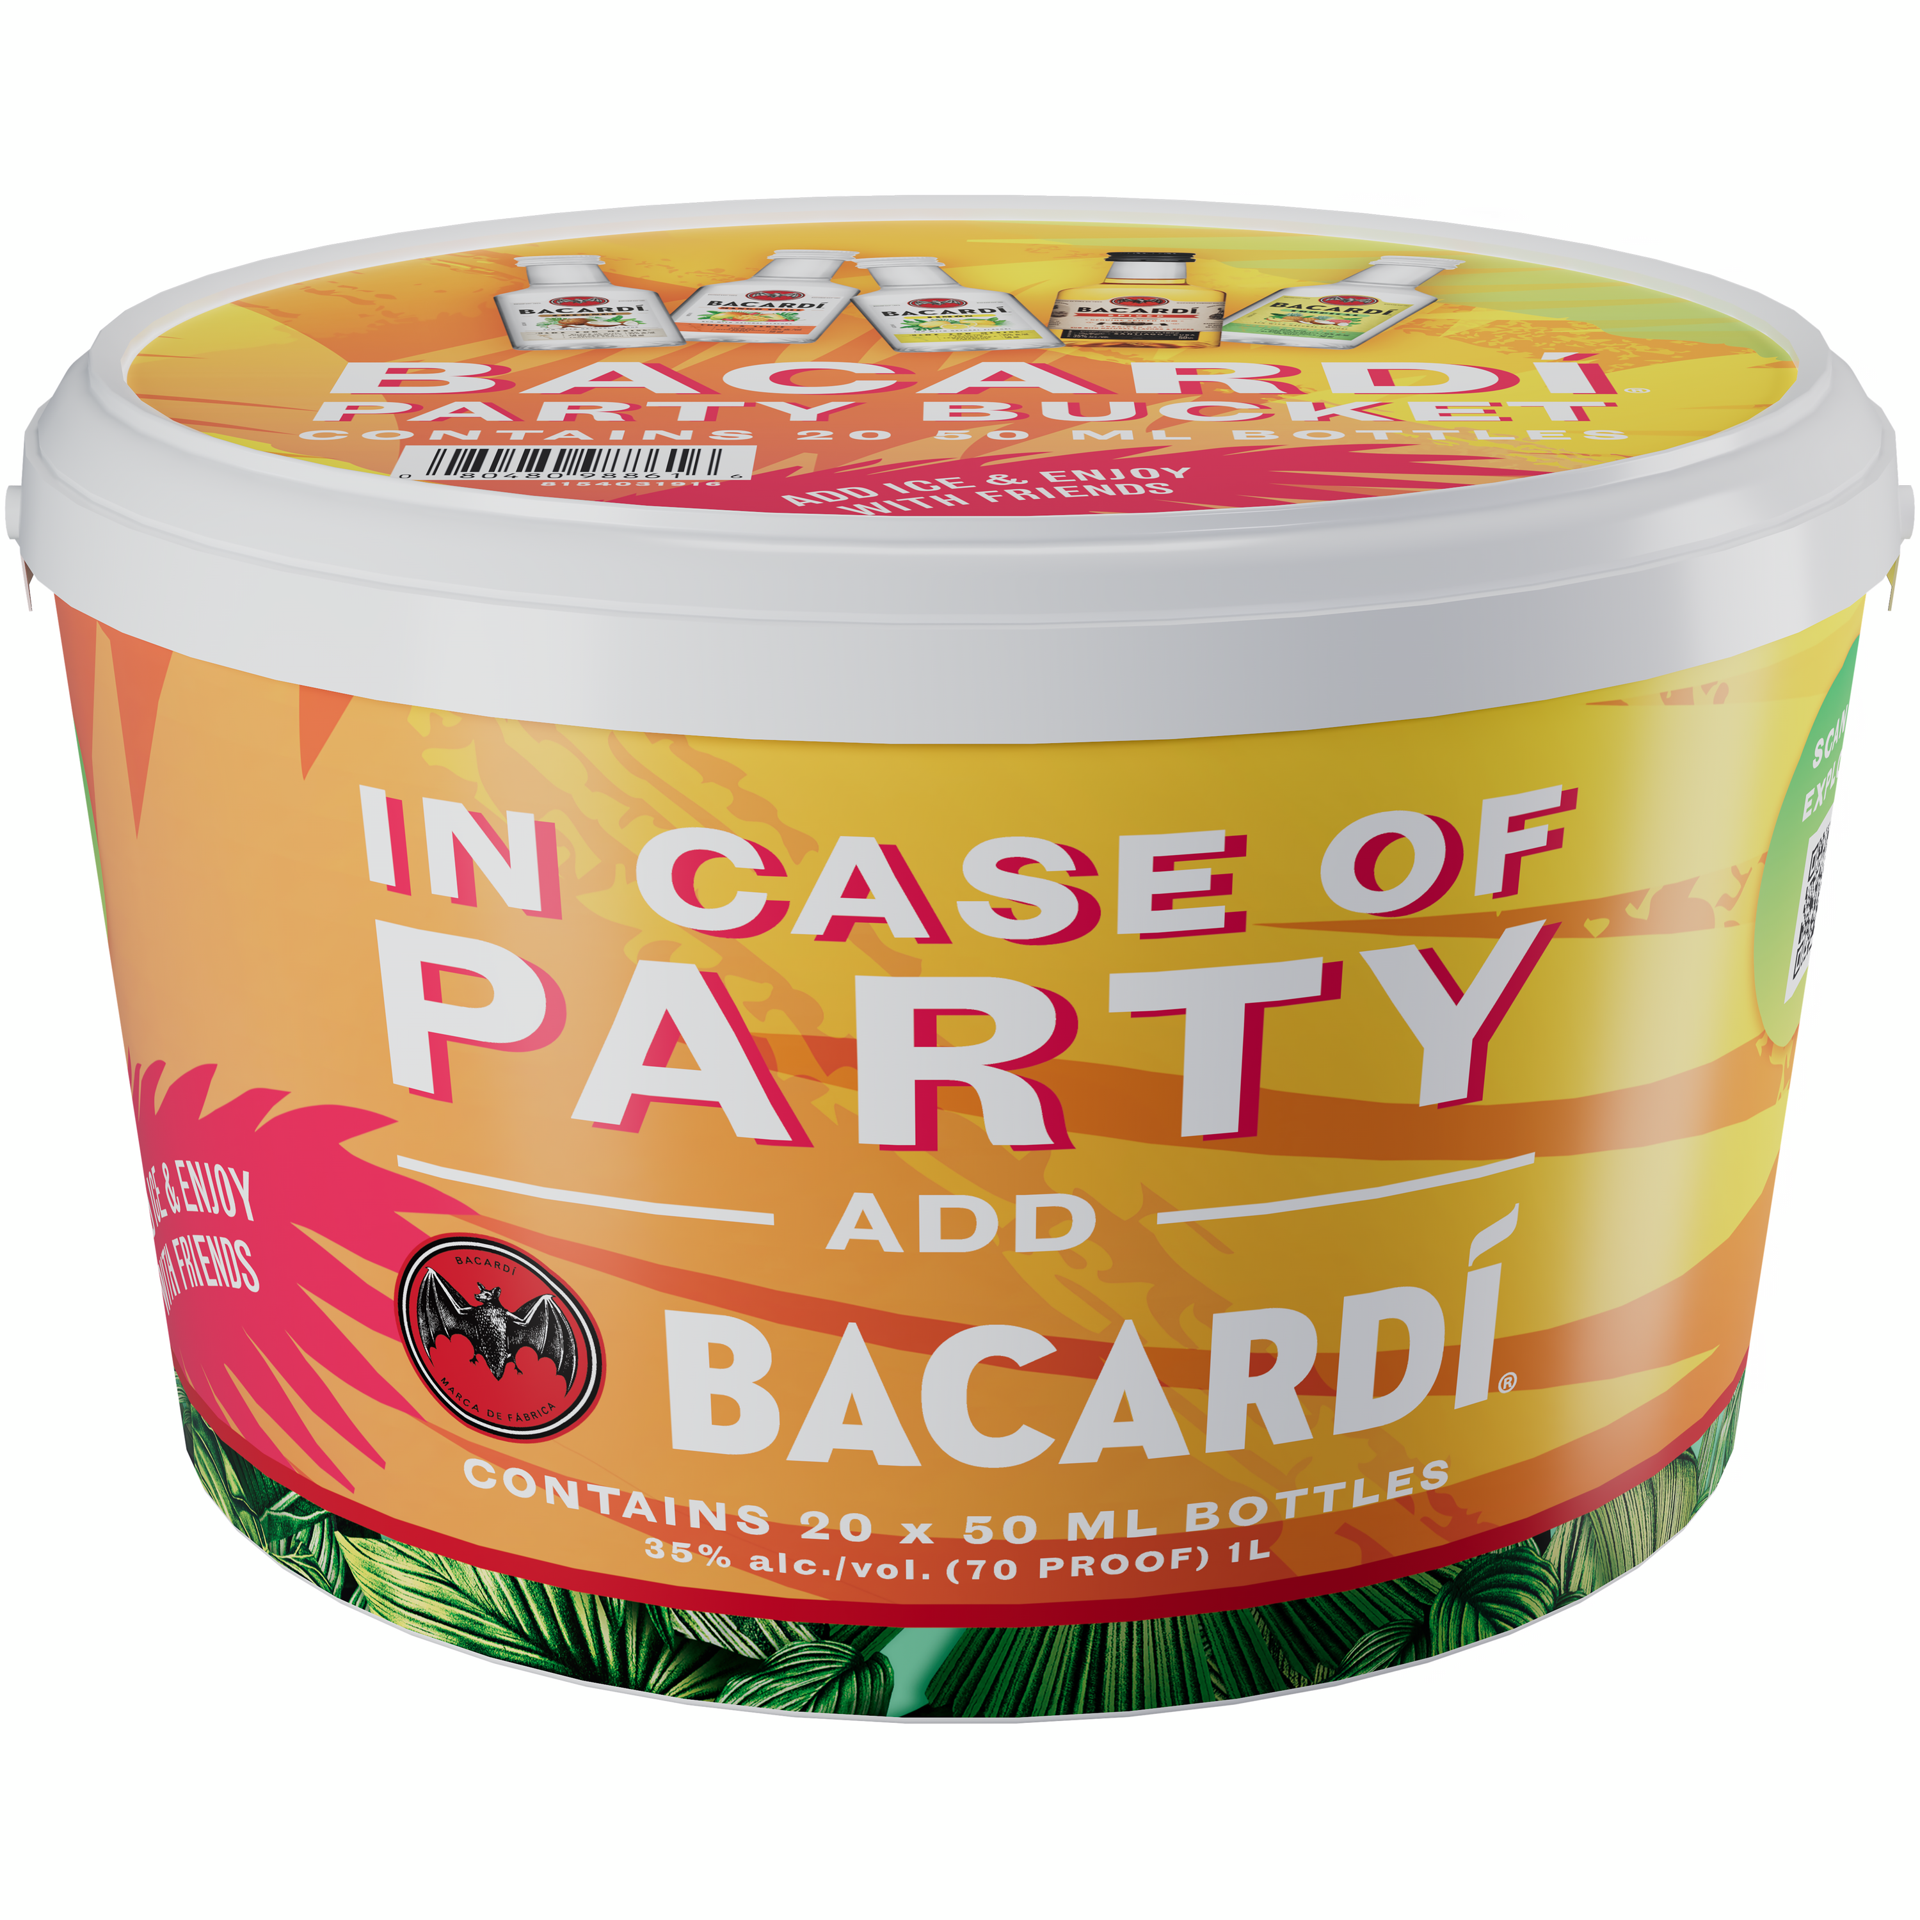 slide 5 of 5, Bacardi Party Bucket With Bacardi Coconut, Mango Chile, Limon, Tropical And Spiced Rum, 20 X 50 Ml Bottles, 50 ml